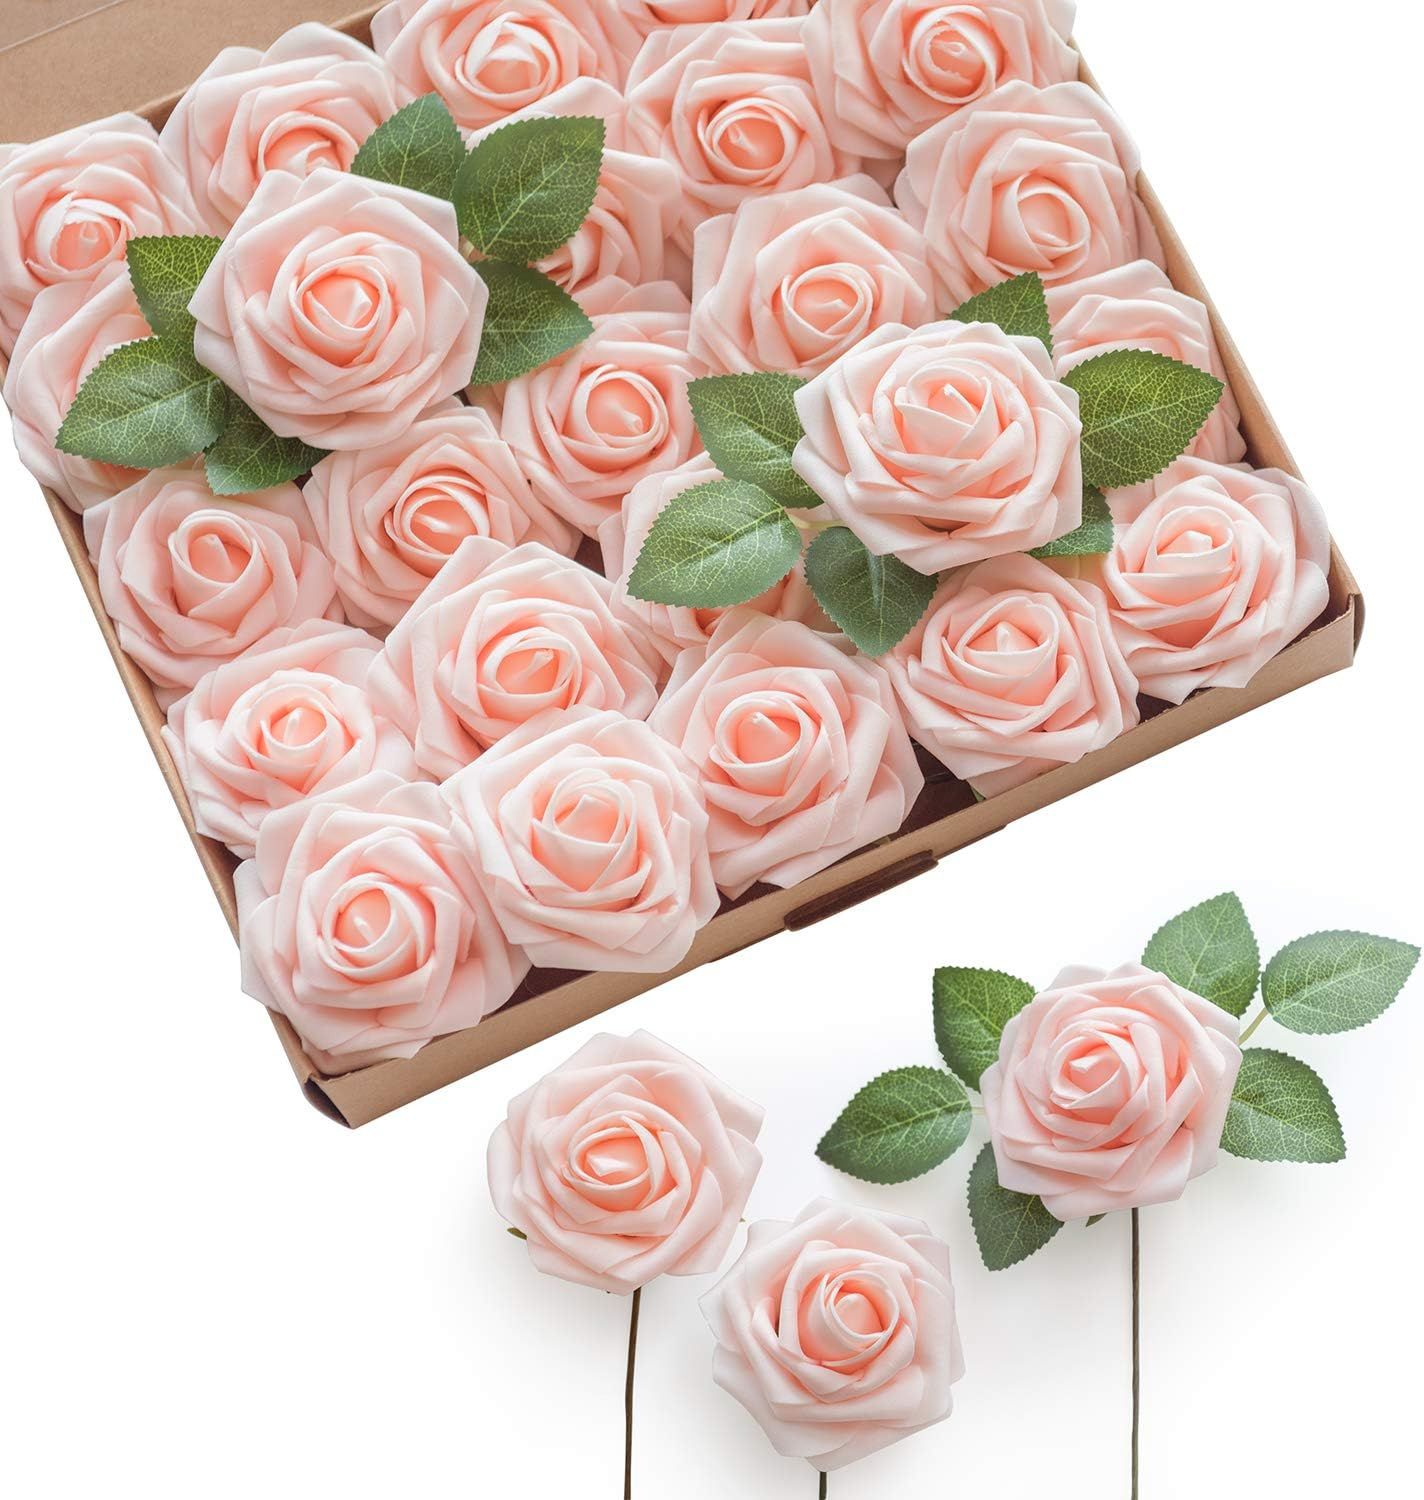 Ling's moment Artificial Flowers Blush Roses 25pcs Real Looking Fake Roses w/Stem for DIY Wedding... | Amazon (US)